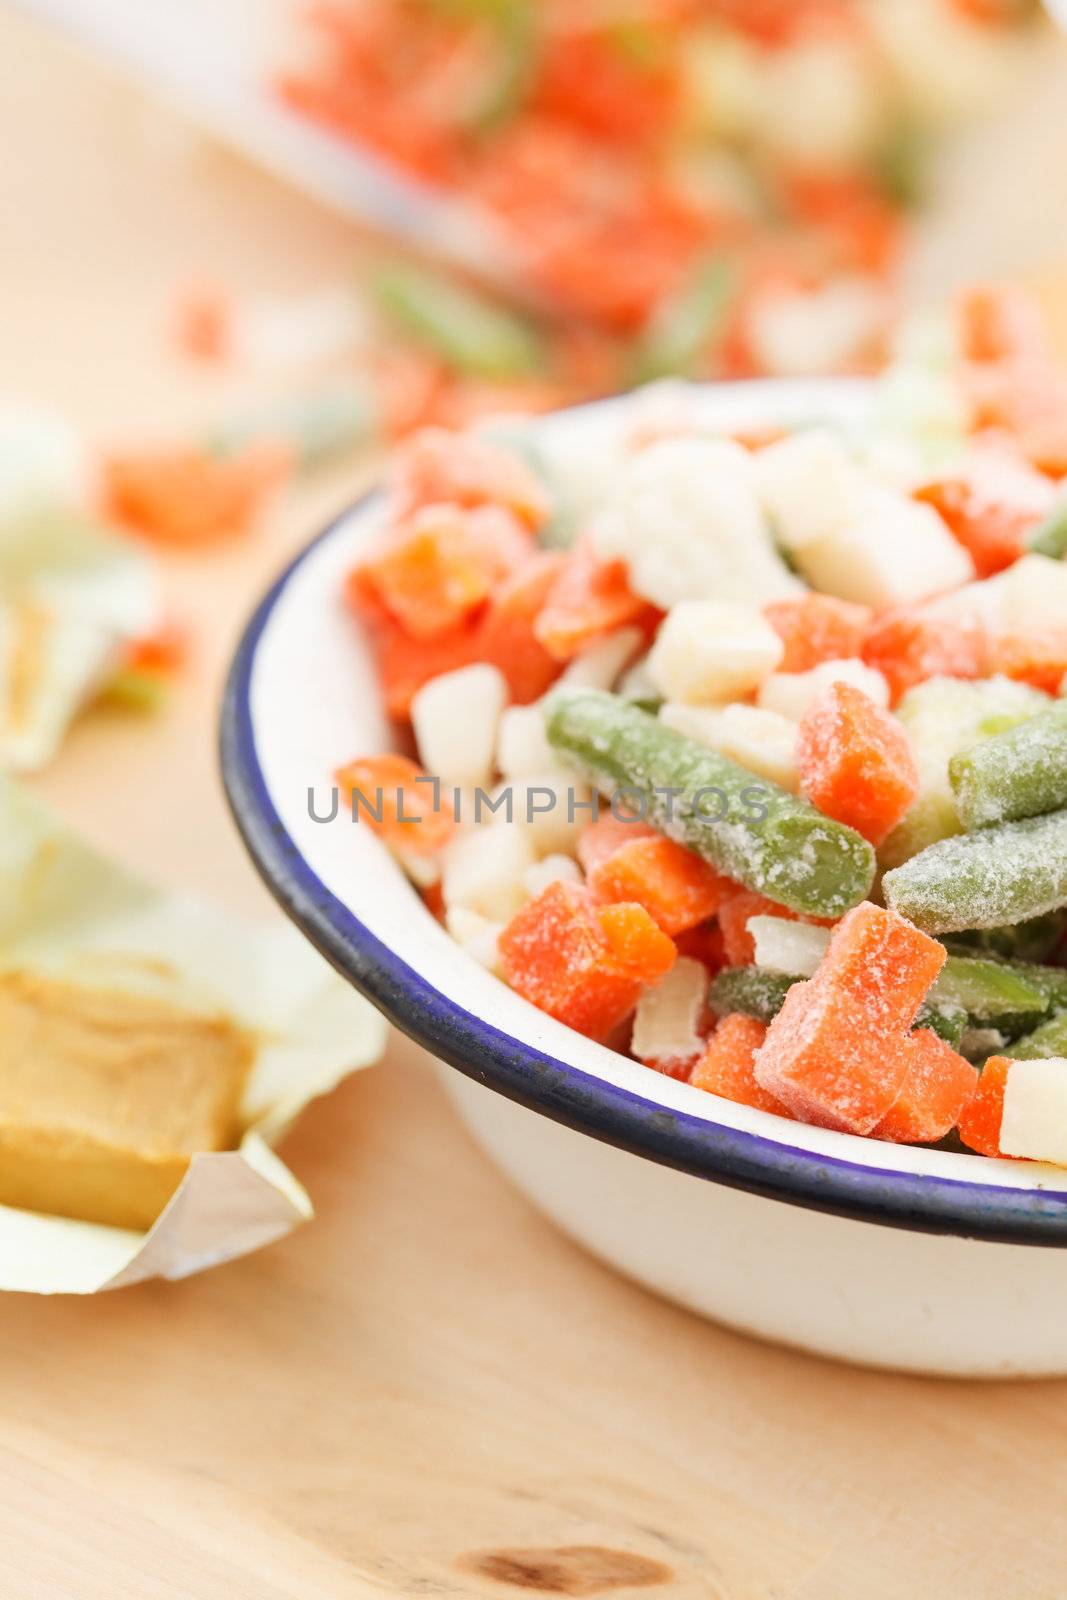 frozen vegetables by shebeko